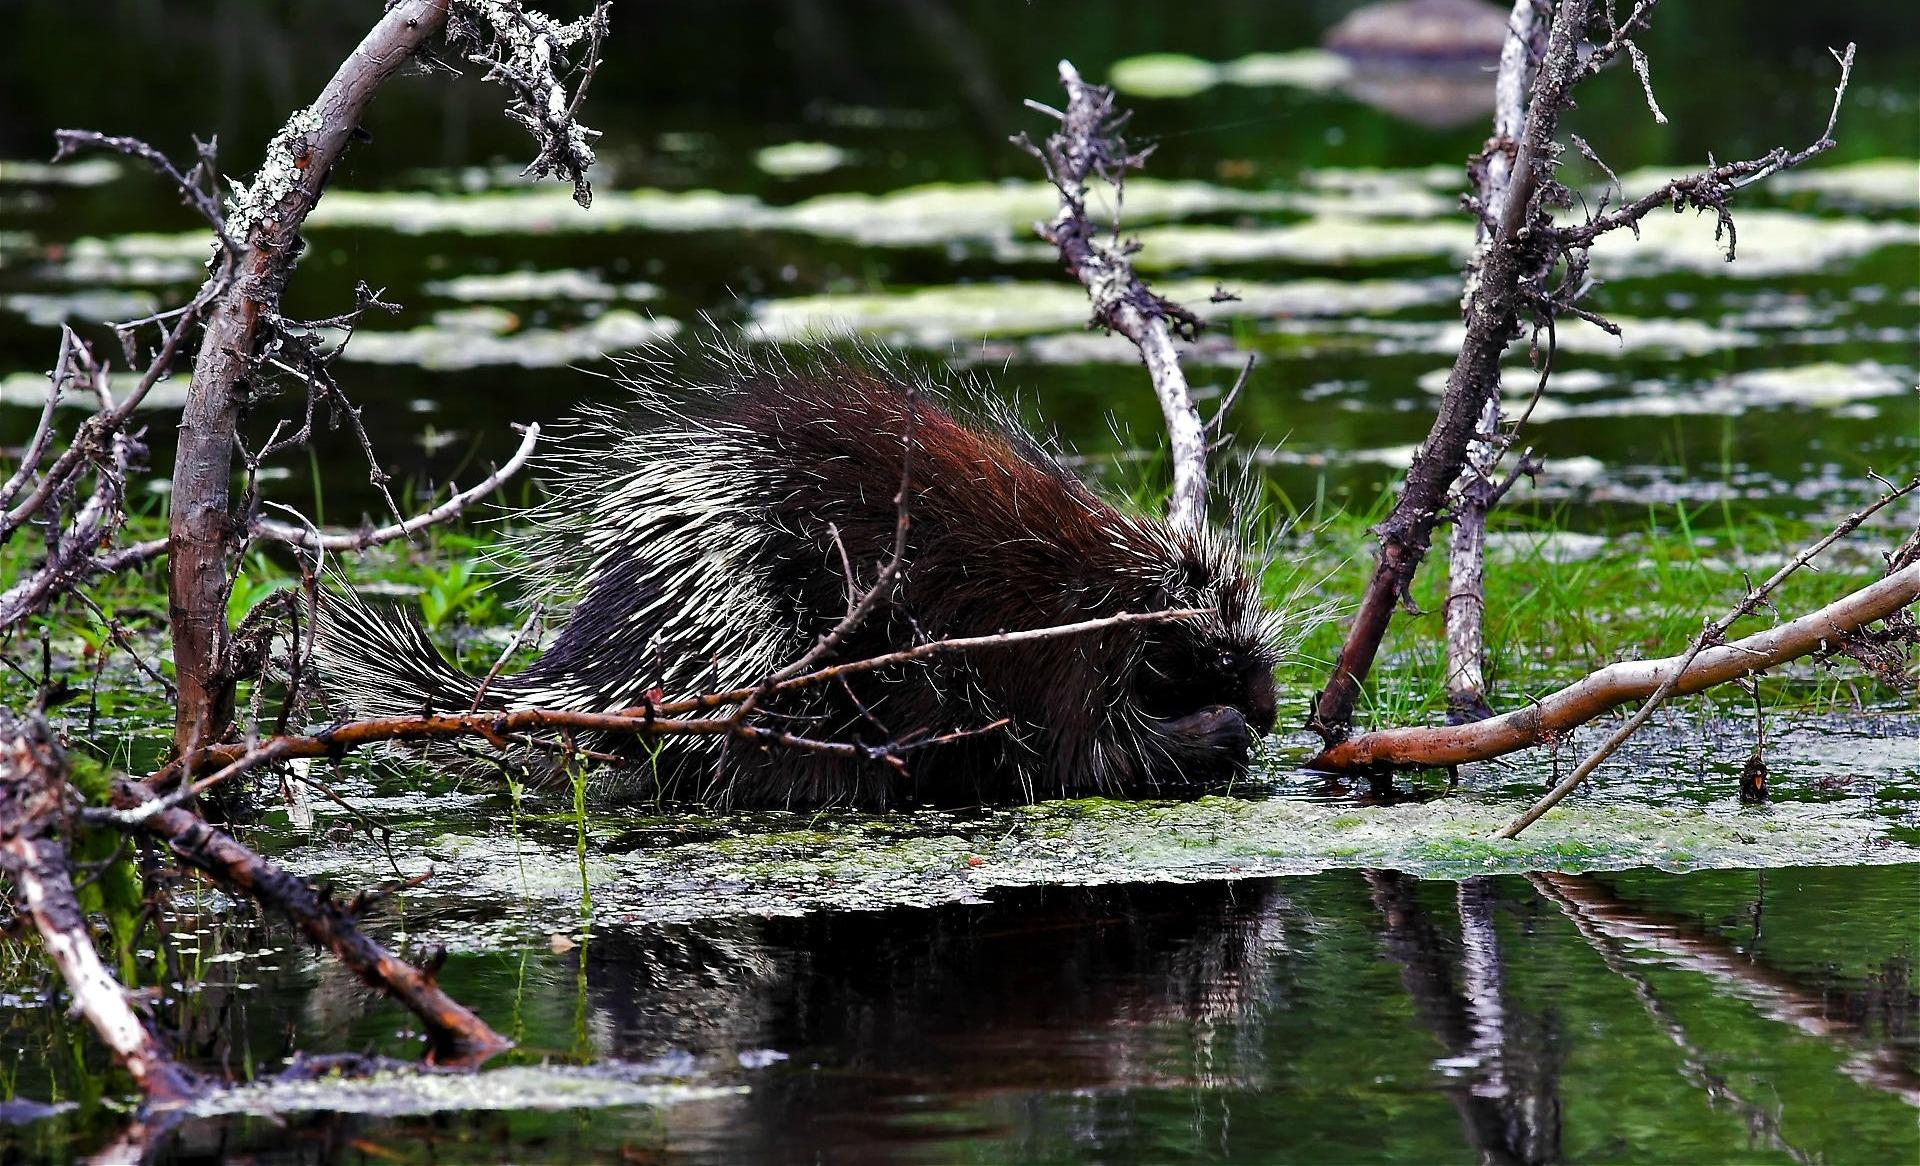 Porcupine Wallpapers Hd Quality - New World Porcupine , HD Wallpaper & Backgrounds